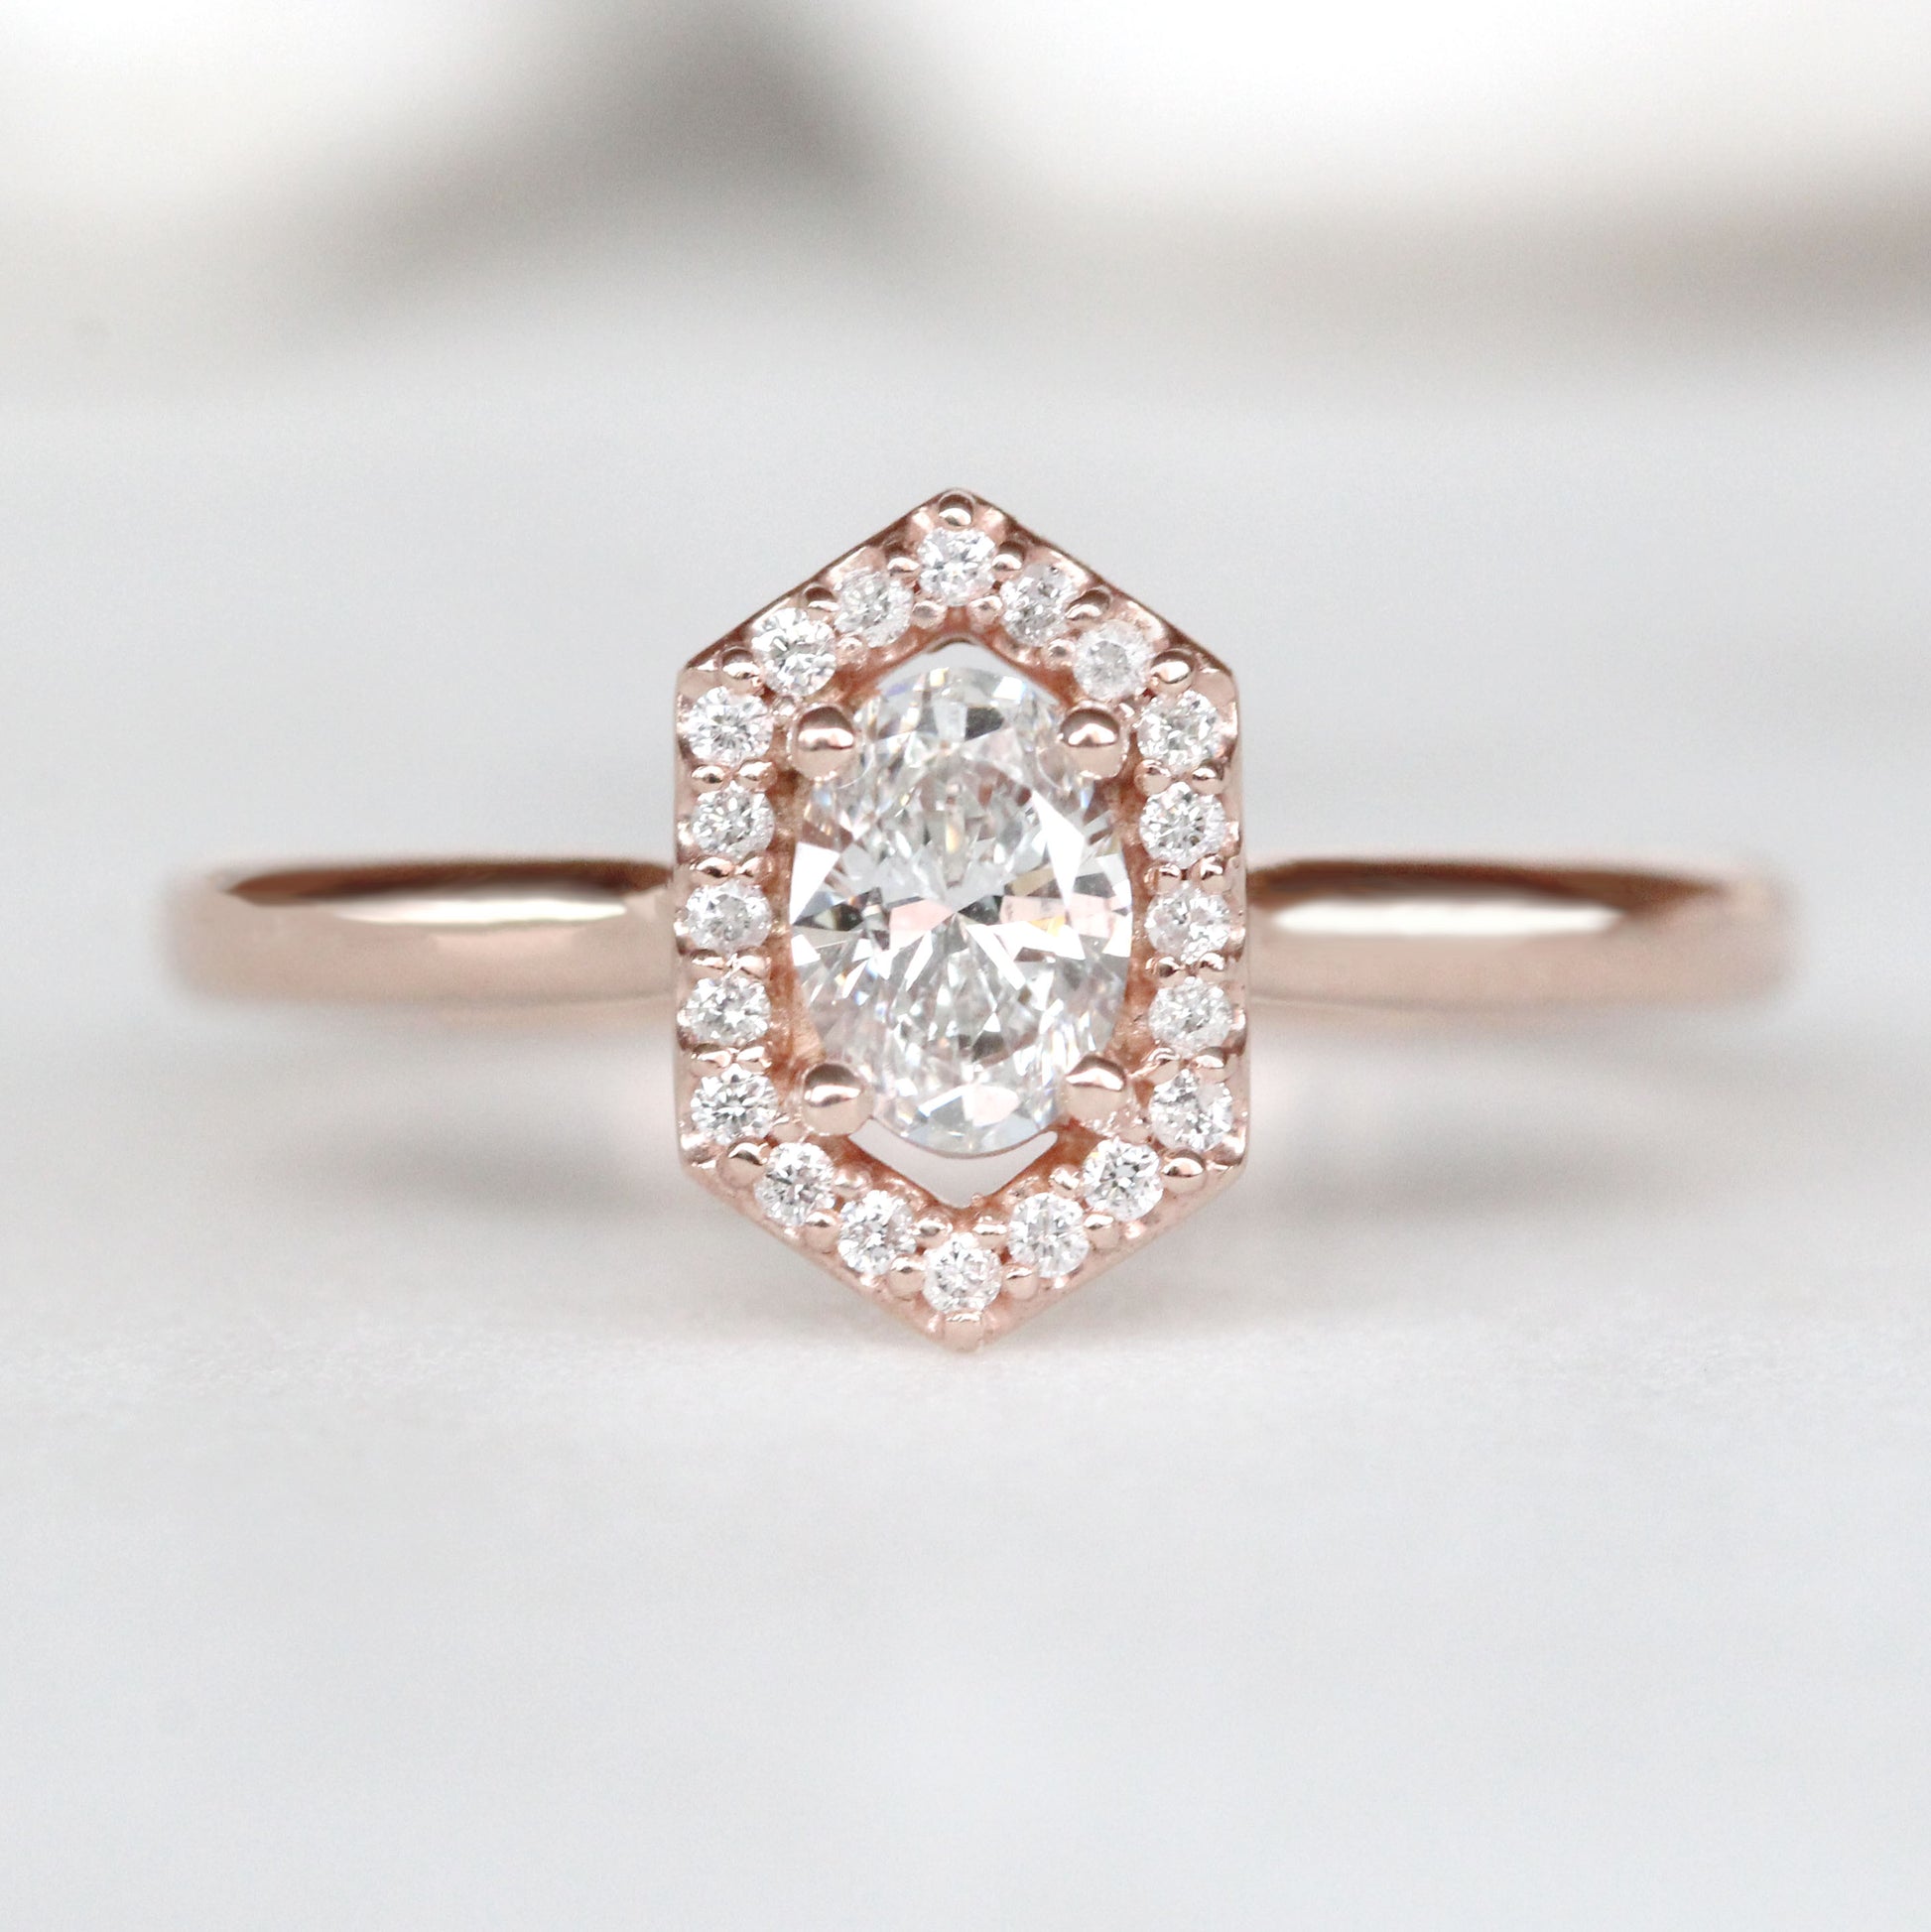 CAELEN Etta Ring with a 0.37 Carat Oval Diamond and Twenty Round White Accent Diamonds in 10k Rose Gold - Ready to Size and Ship - Midwinter Co. Alternative Bridal Rings and Modern Fine Jewelry